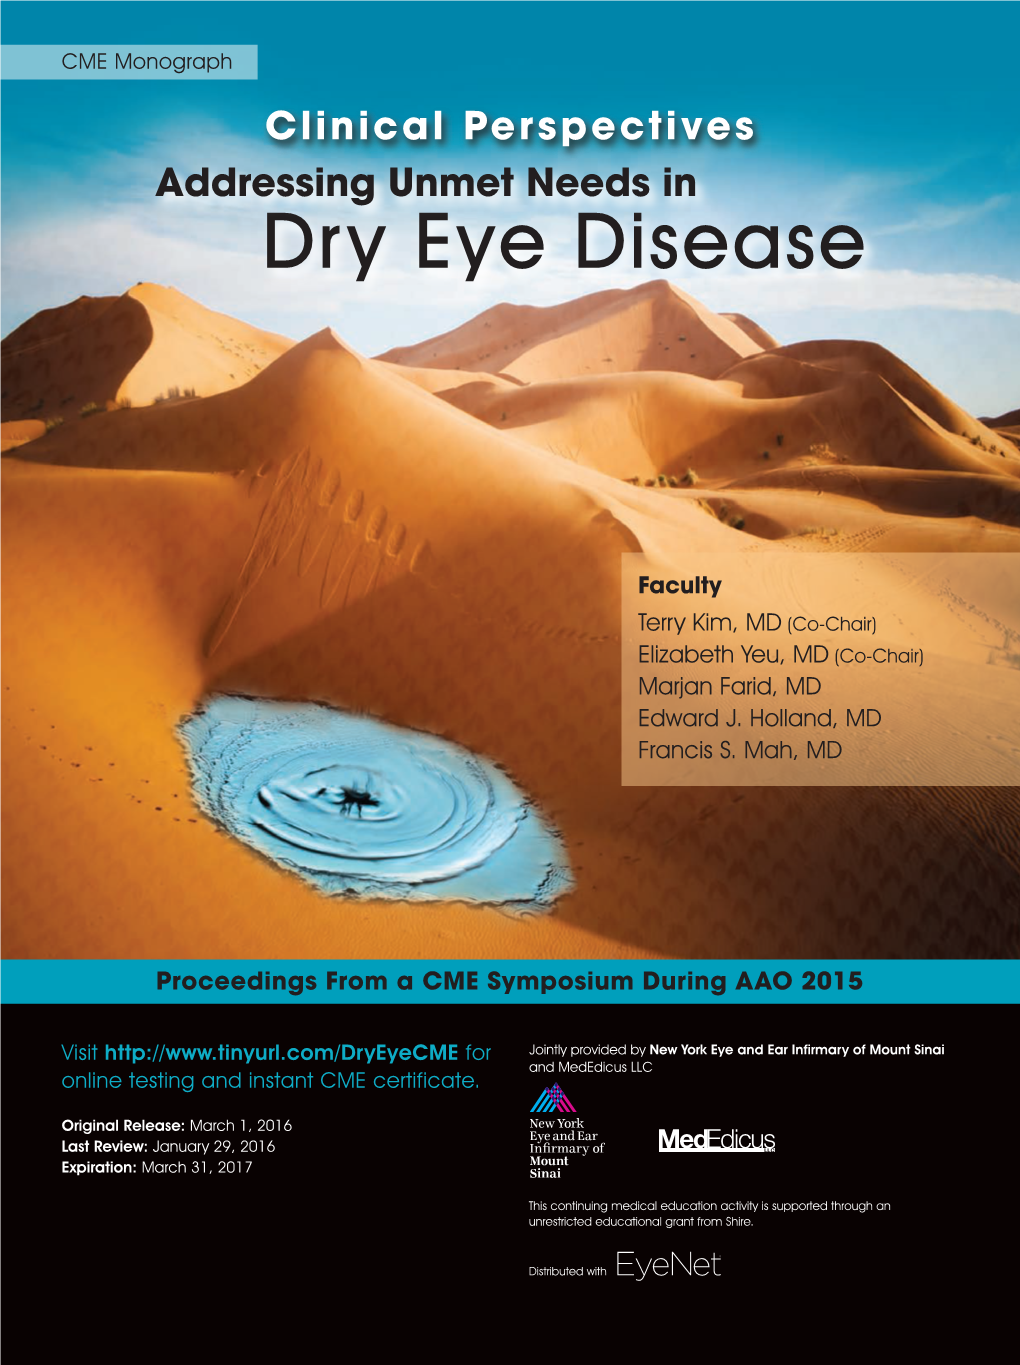 Clinical Perspectives: Addressing Unmet Needs in Dry Eye Disease Expiration: March 31, 2017 Proceedings from a CME Symposium During AAO 2015